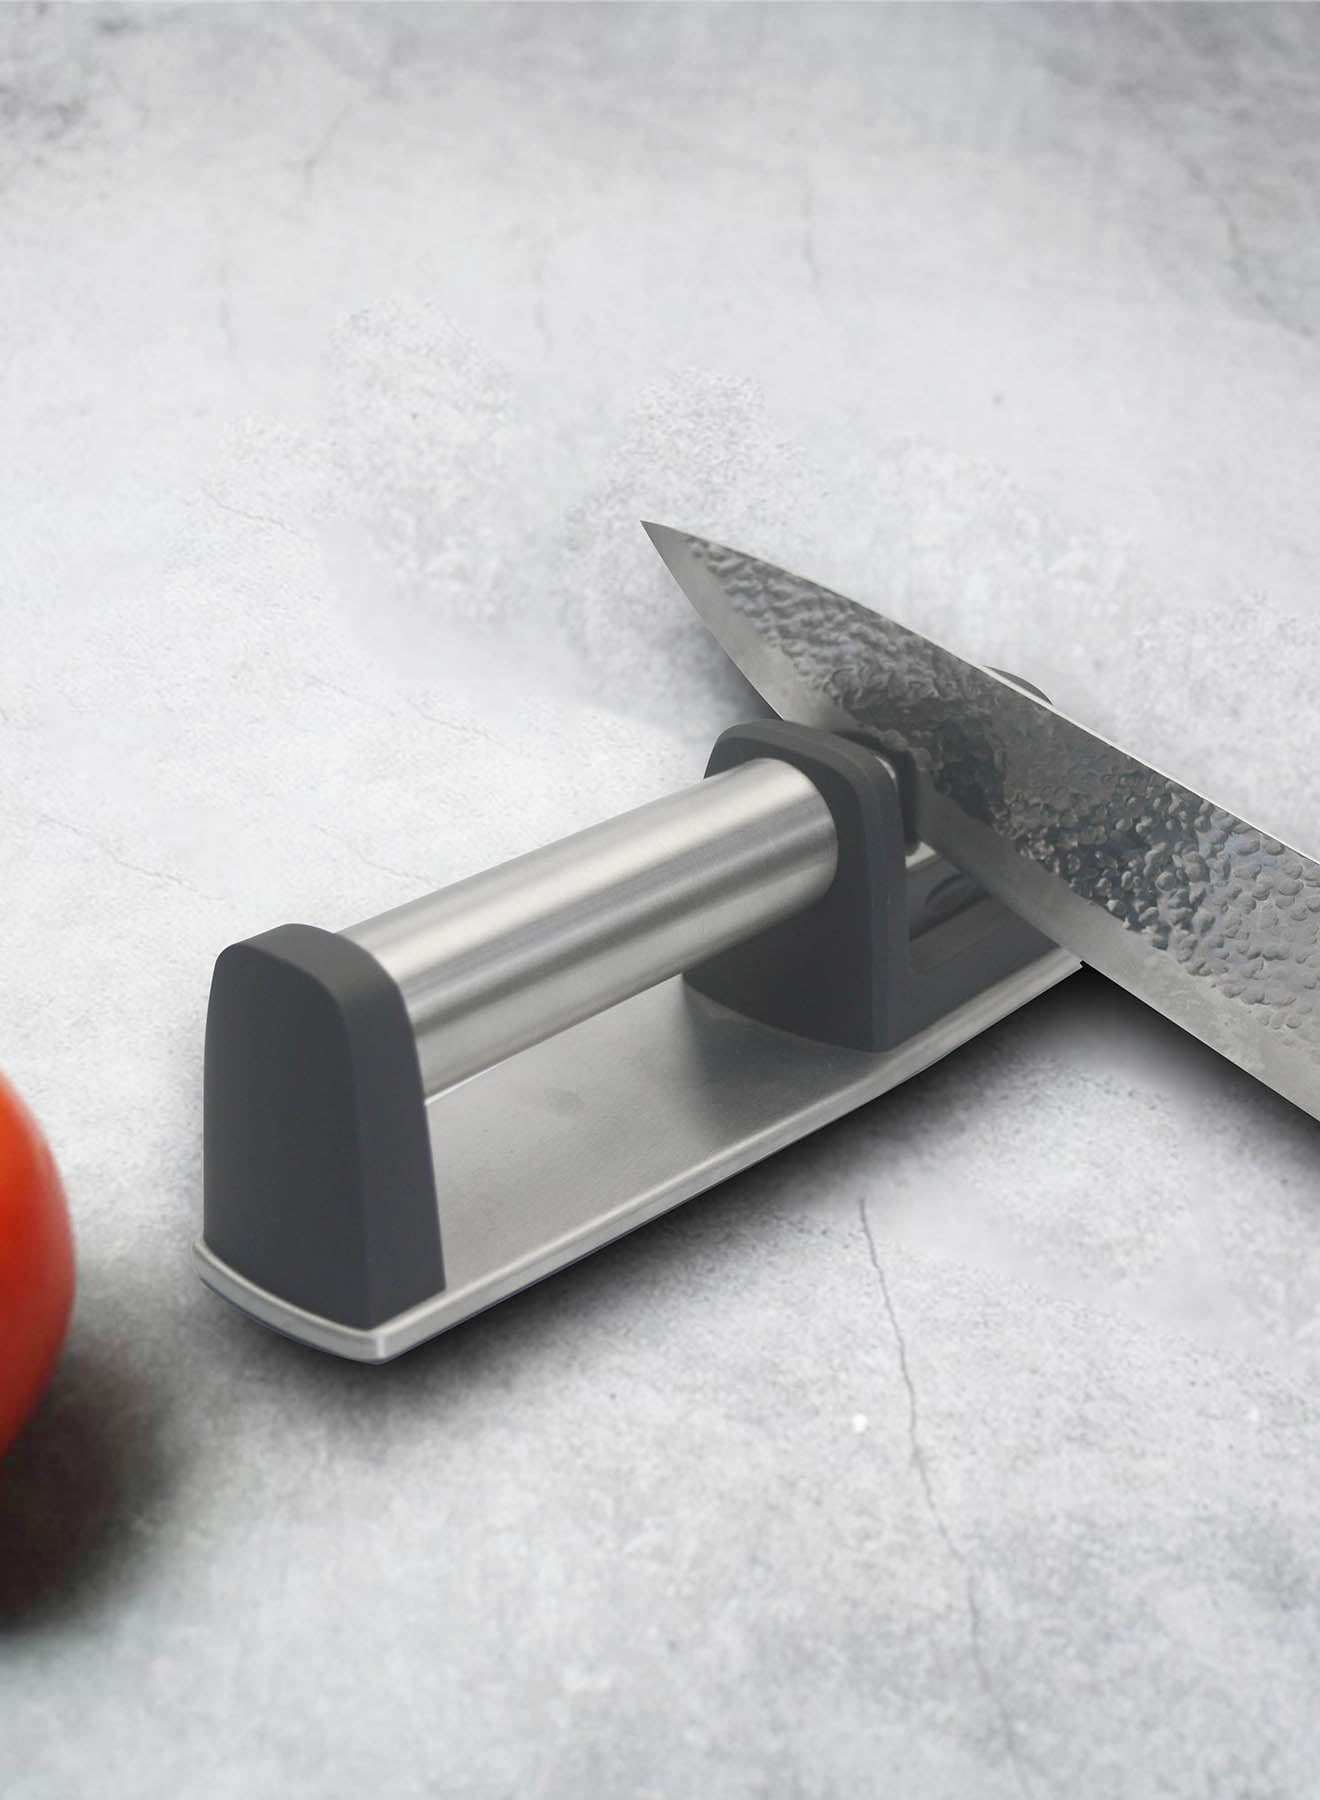 Knife Sharpener - With Stainless Steel Blades - Surdy And Safe - Essential Kitchen Accessories - For Kitchen Knives - Silver Mallow 